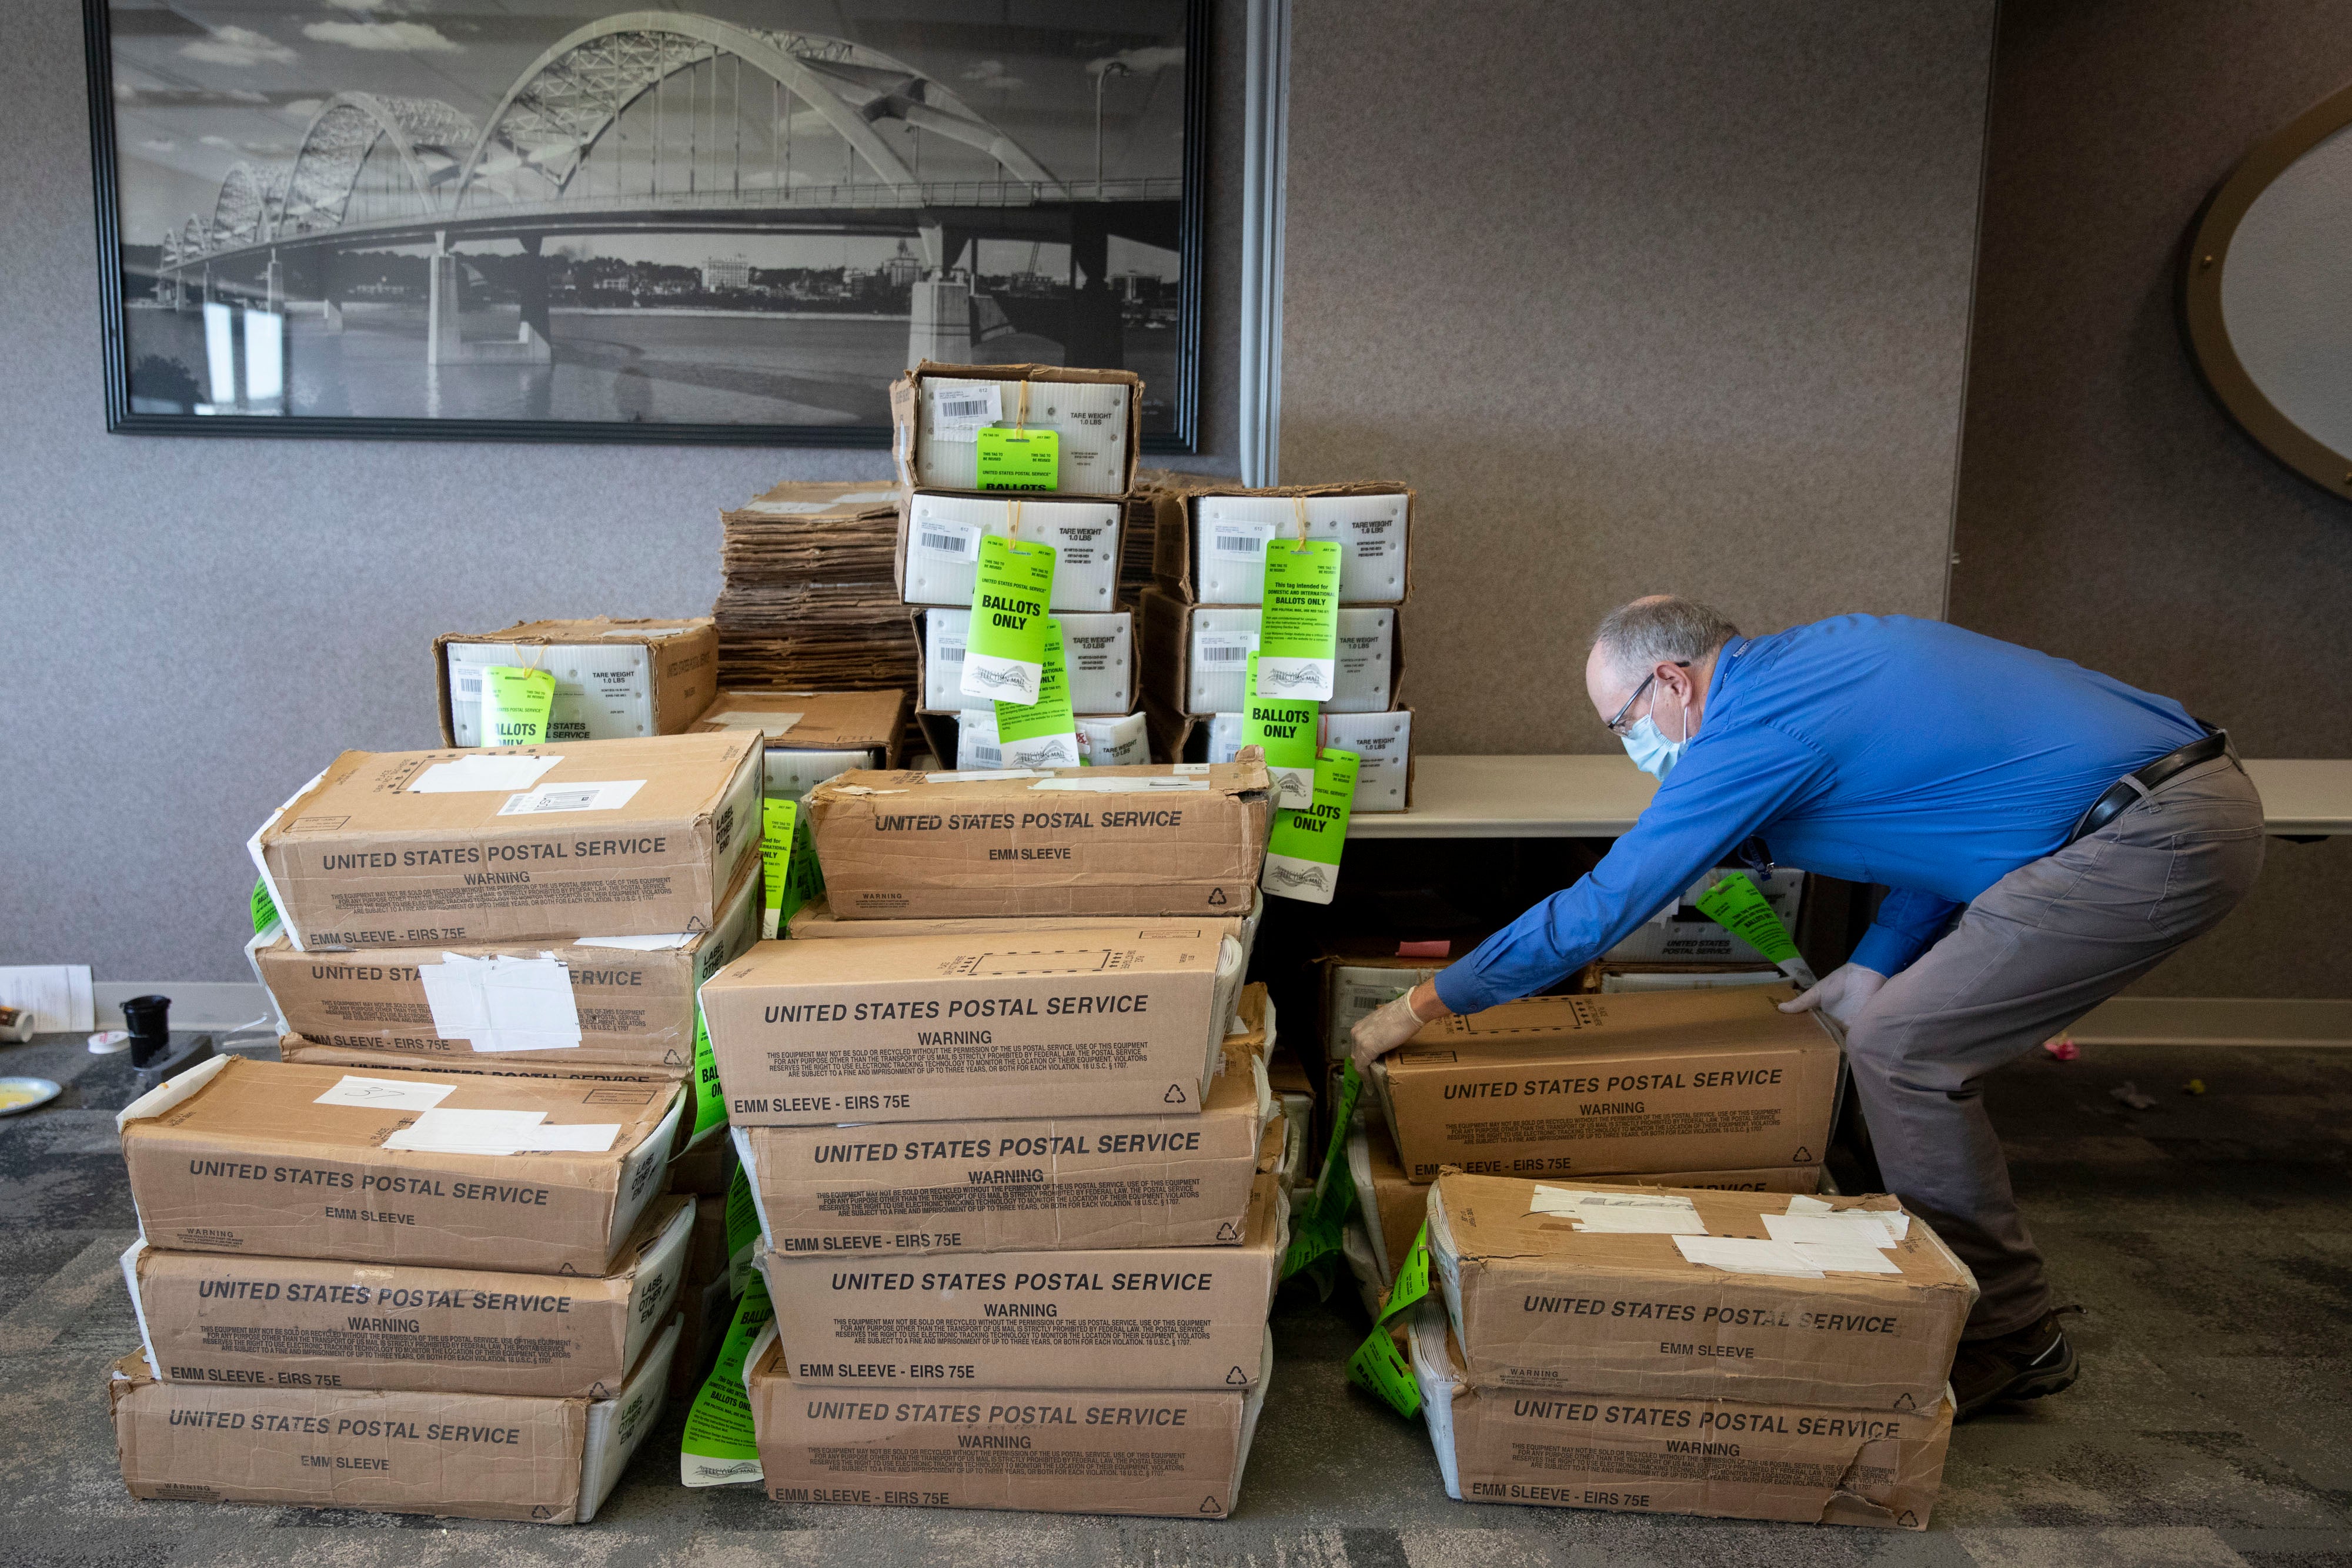 Auditors office employee Roland Caldwell picks up a box of absentee ballots at the Scott County, Iowa, auditor's office in Davenport on Monday